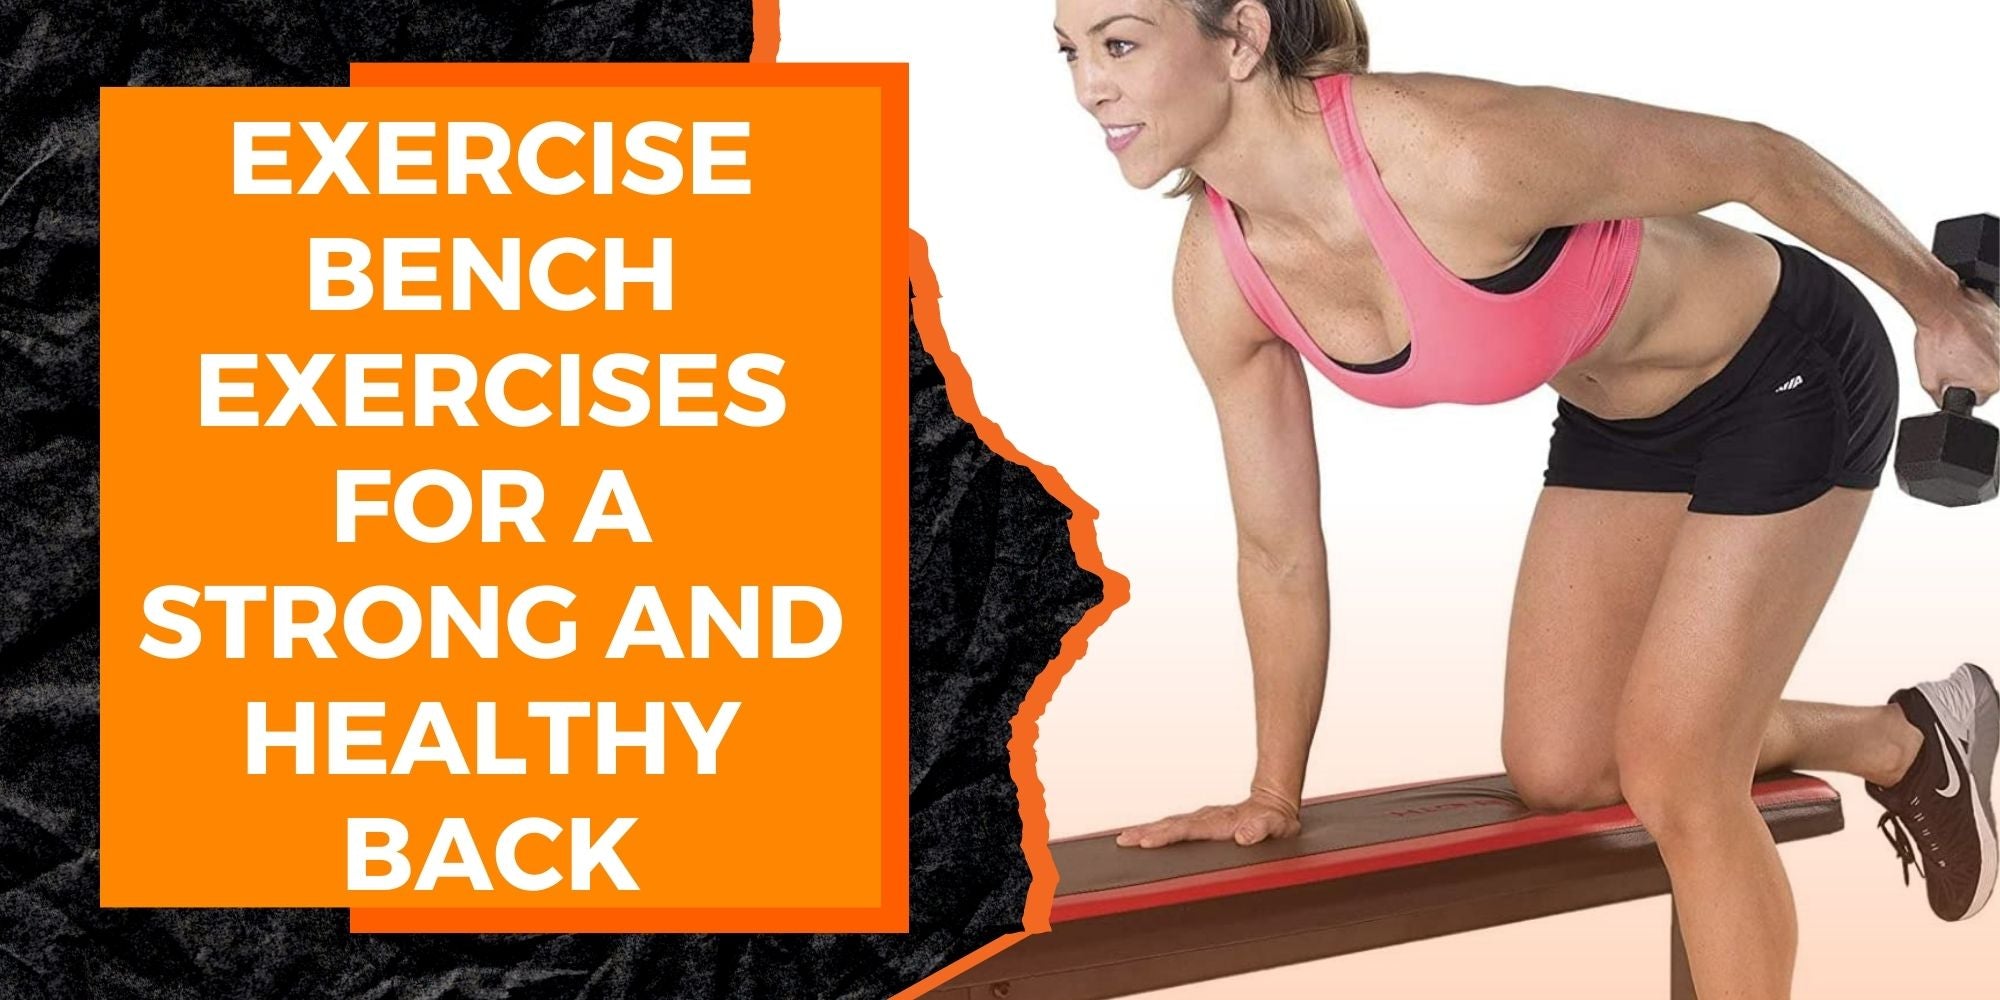 Exercise Bench Exercises for a Strong and Healthy Back